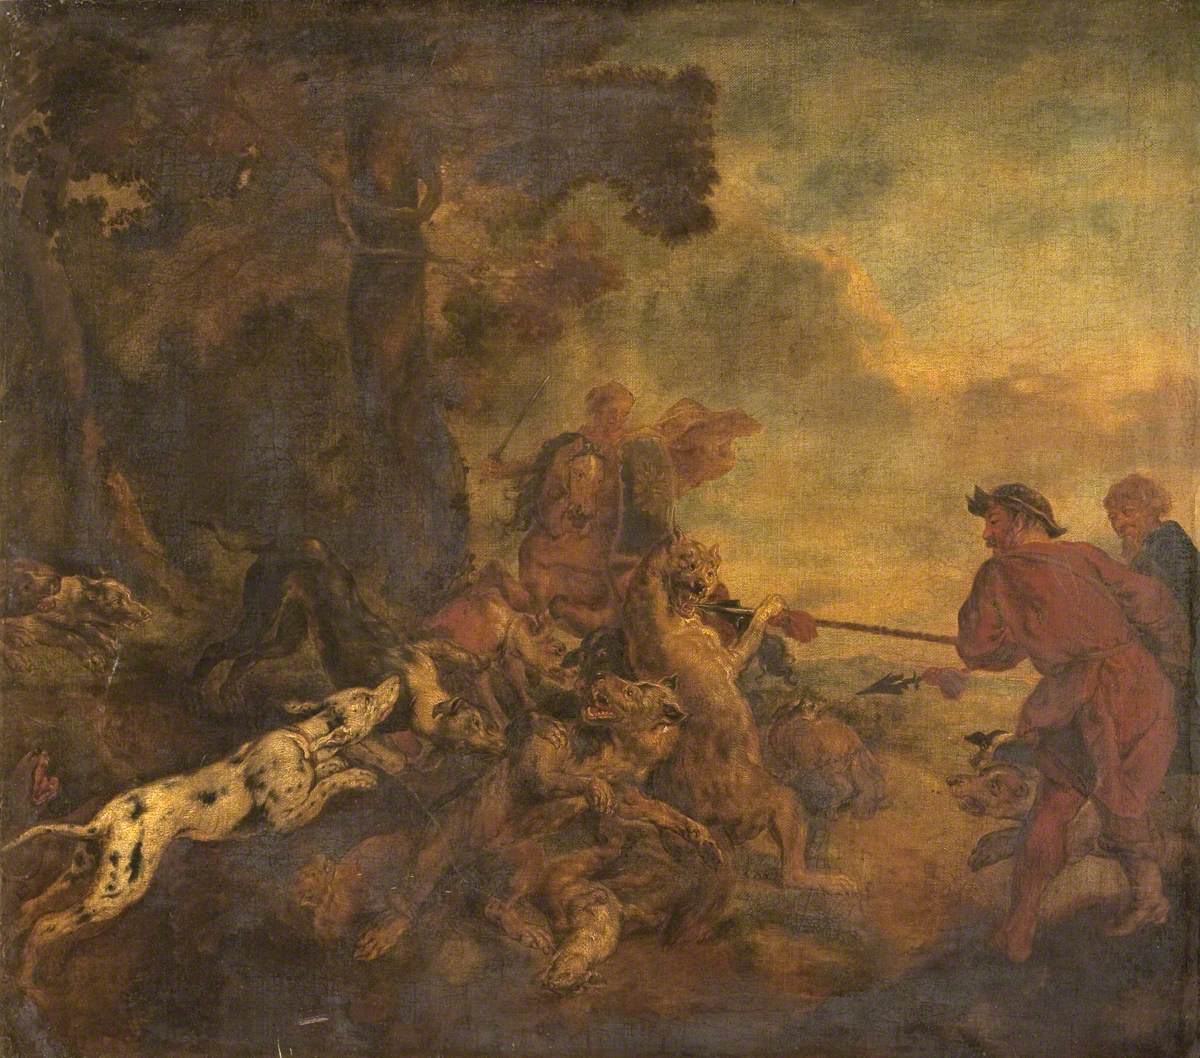 Hunting Scene with Hounds and Tigers